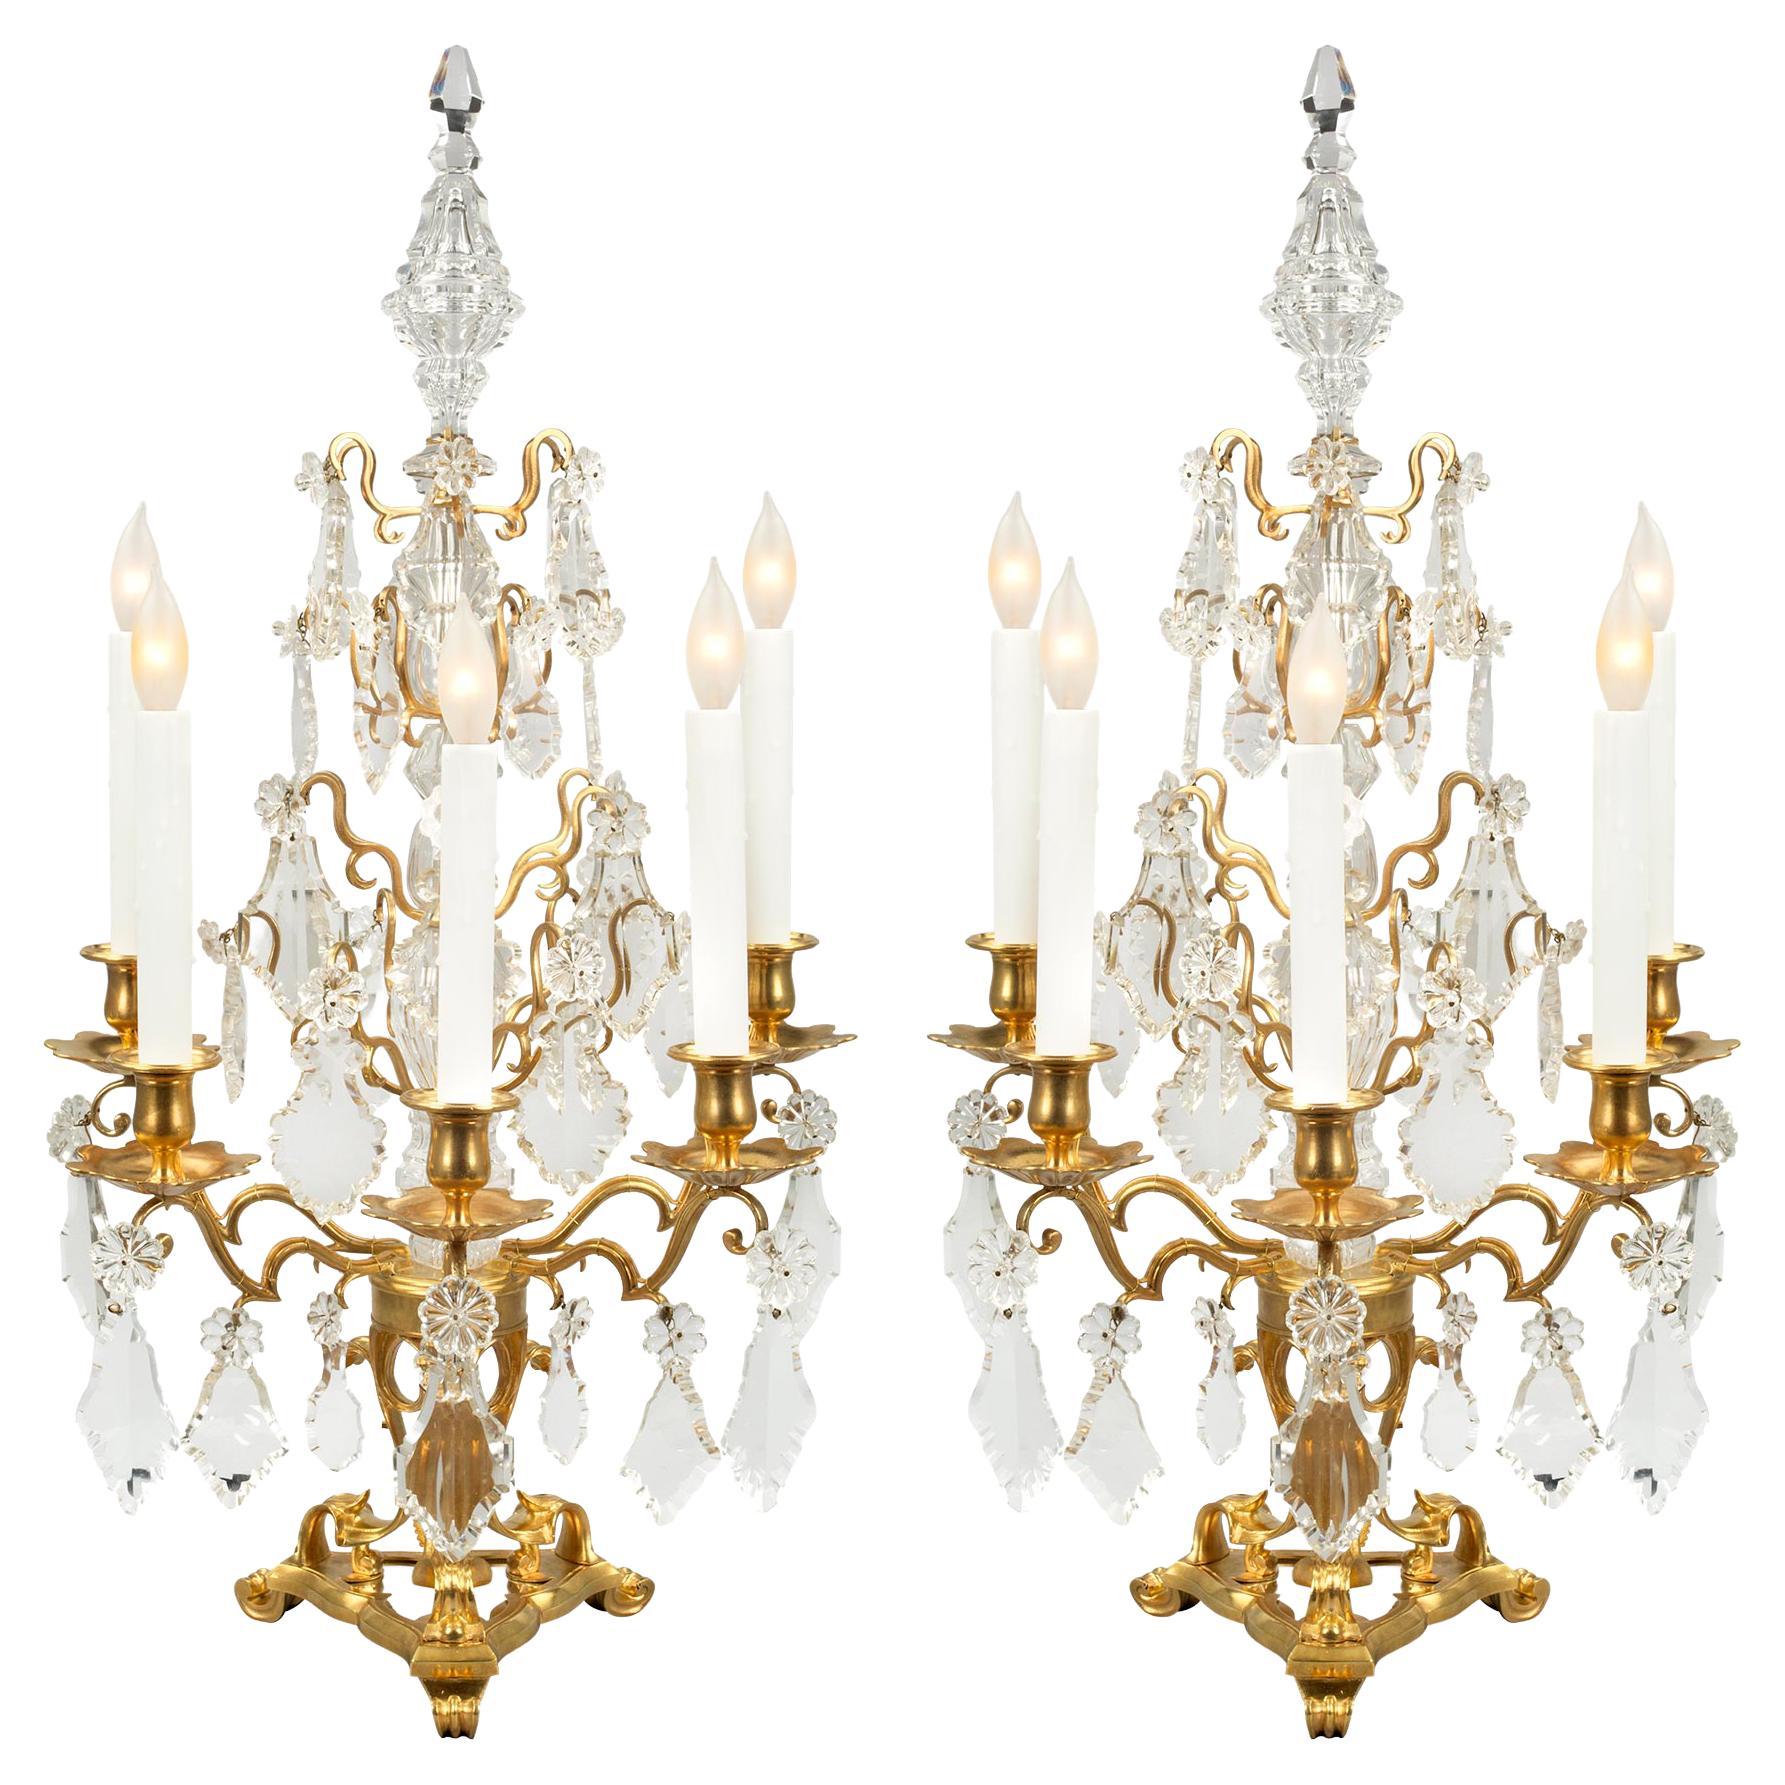 Pair of French 19th Century Louis XV Style Ormolu and Baccarat Girandoles For Sale